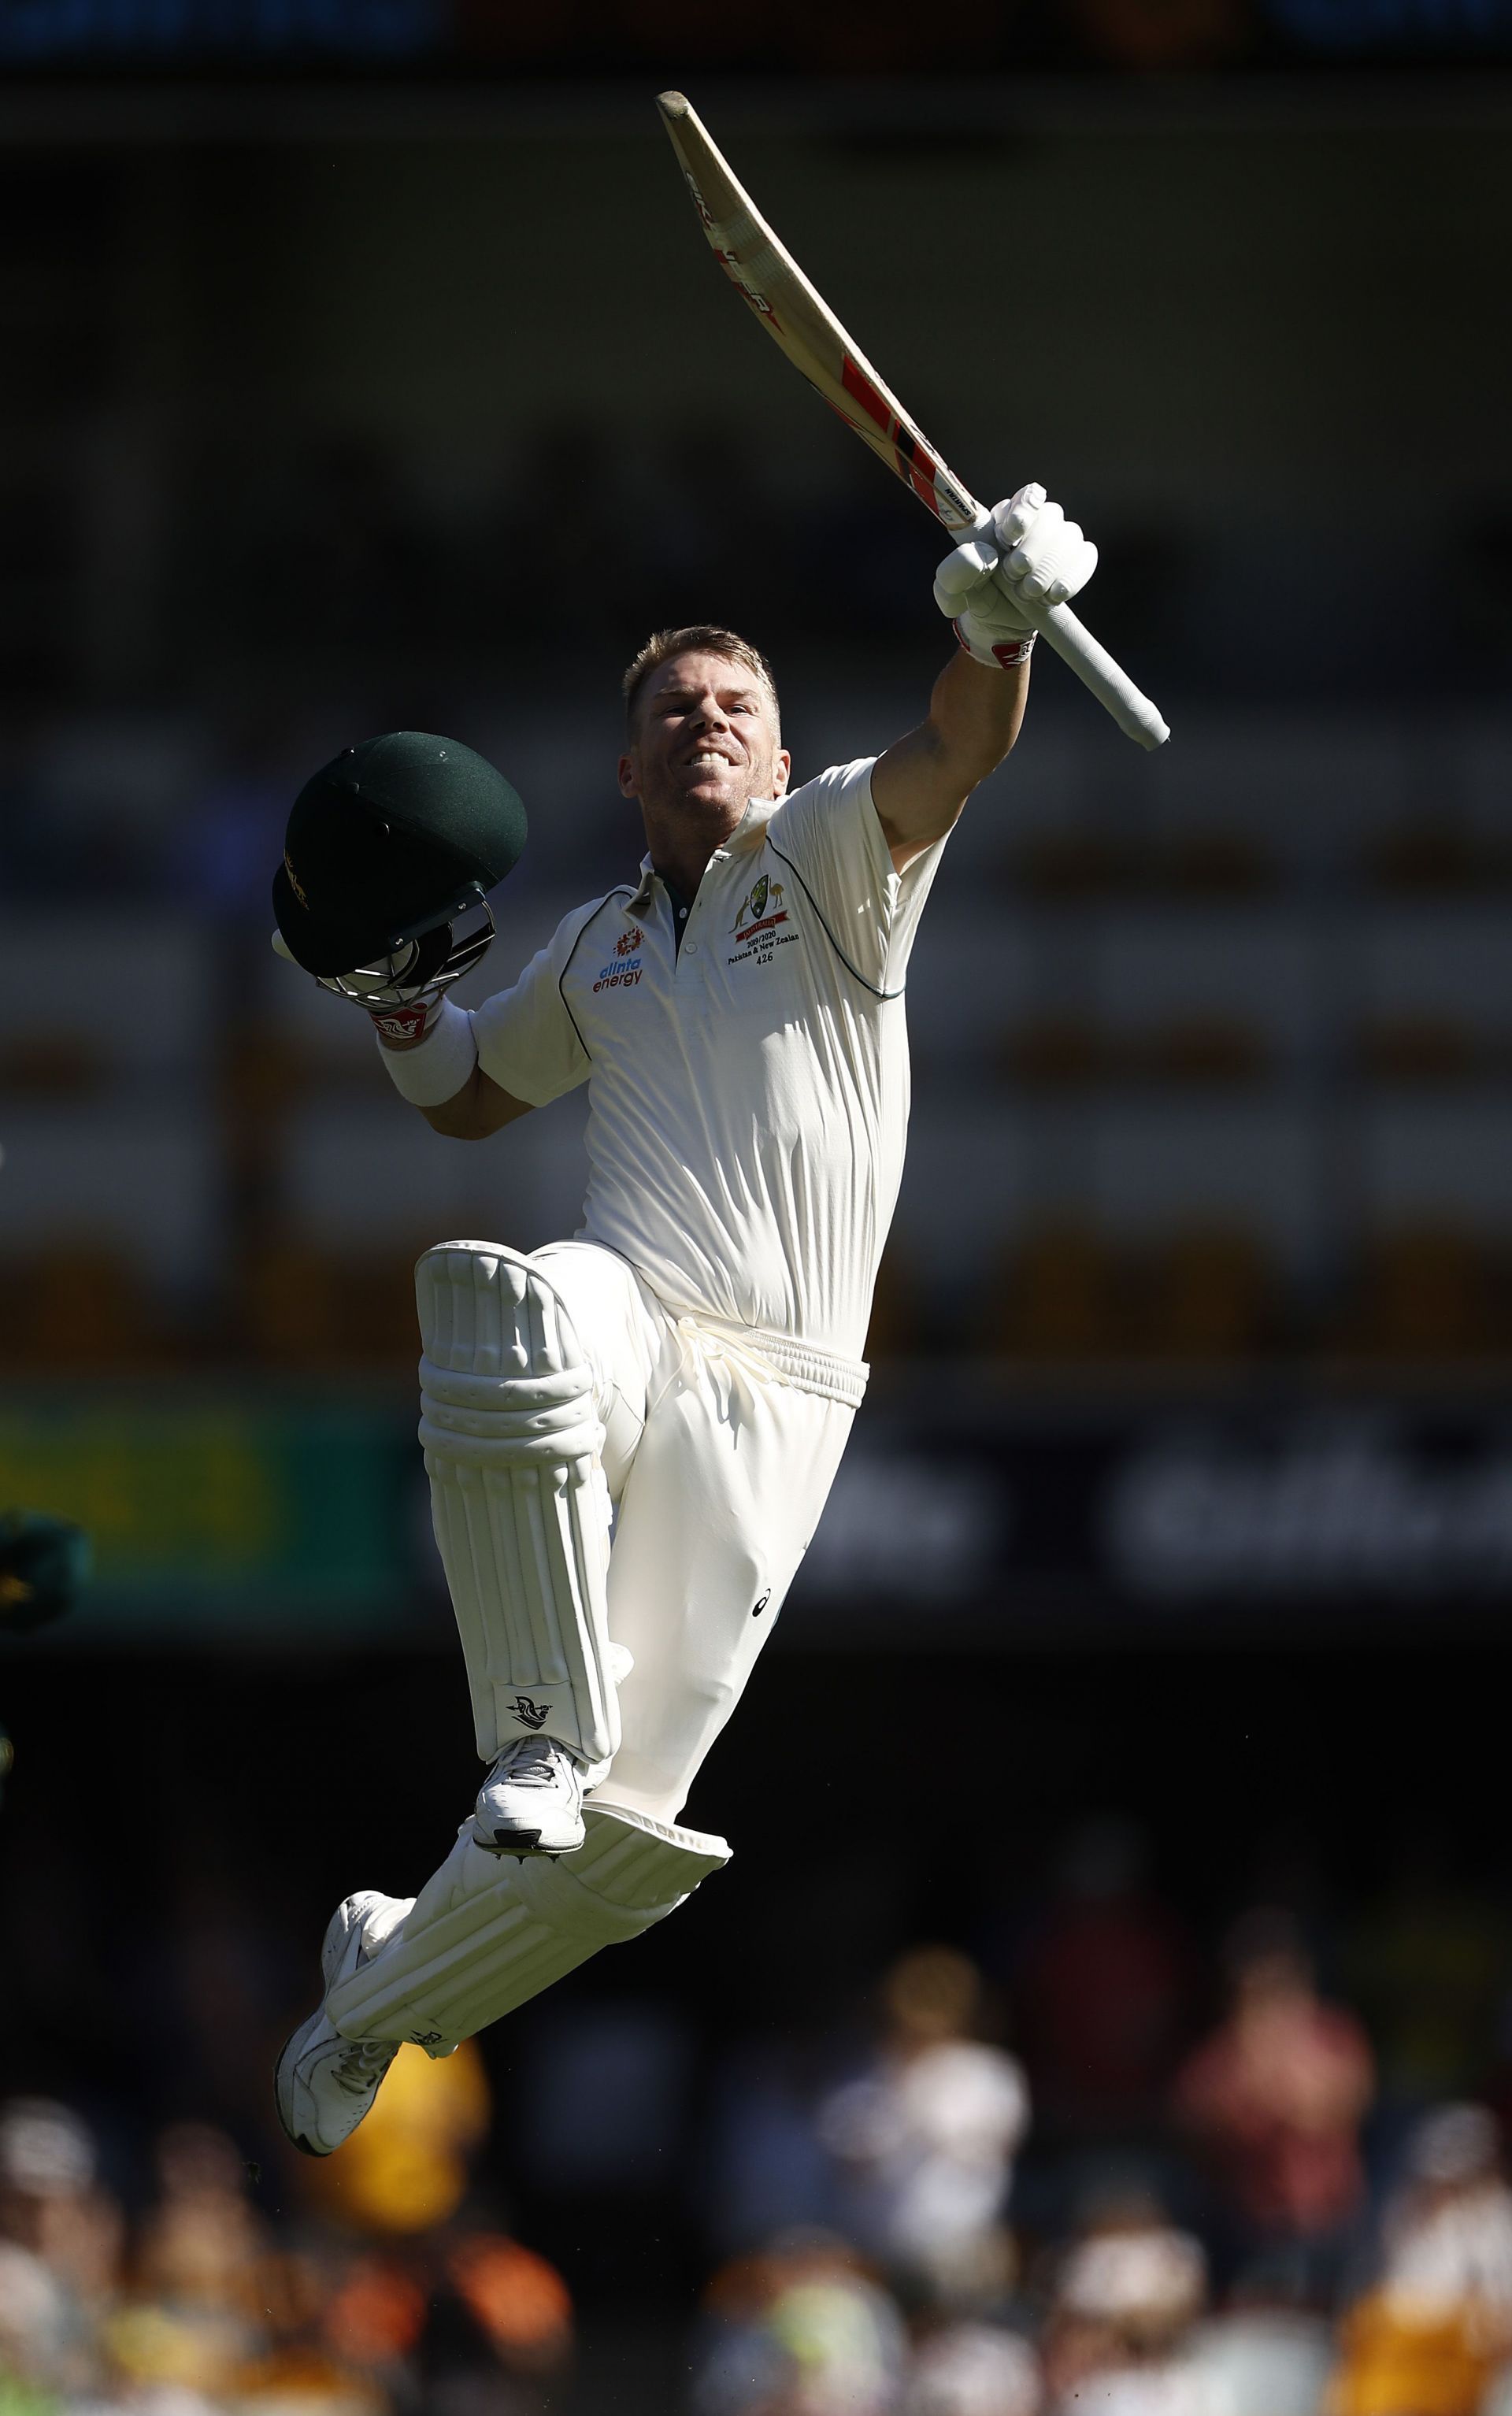 The signature David Warner leap - iconic, much like his batting!